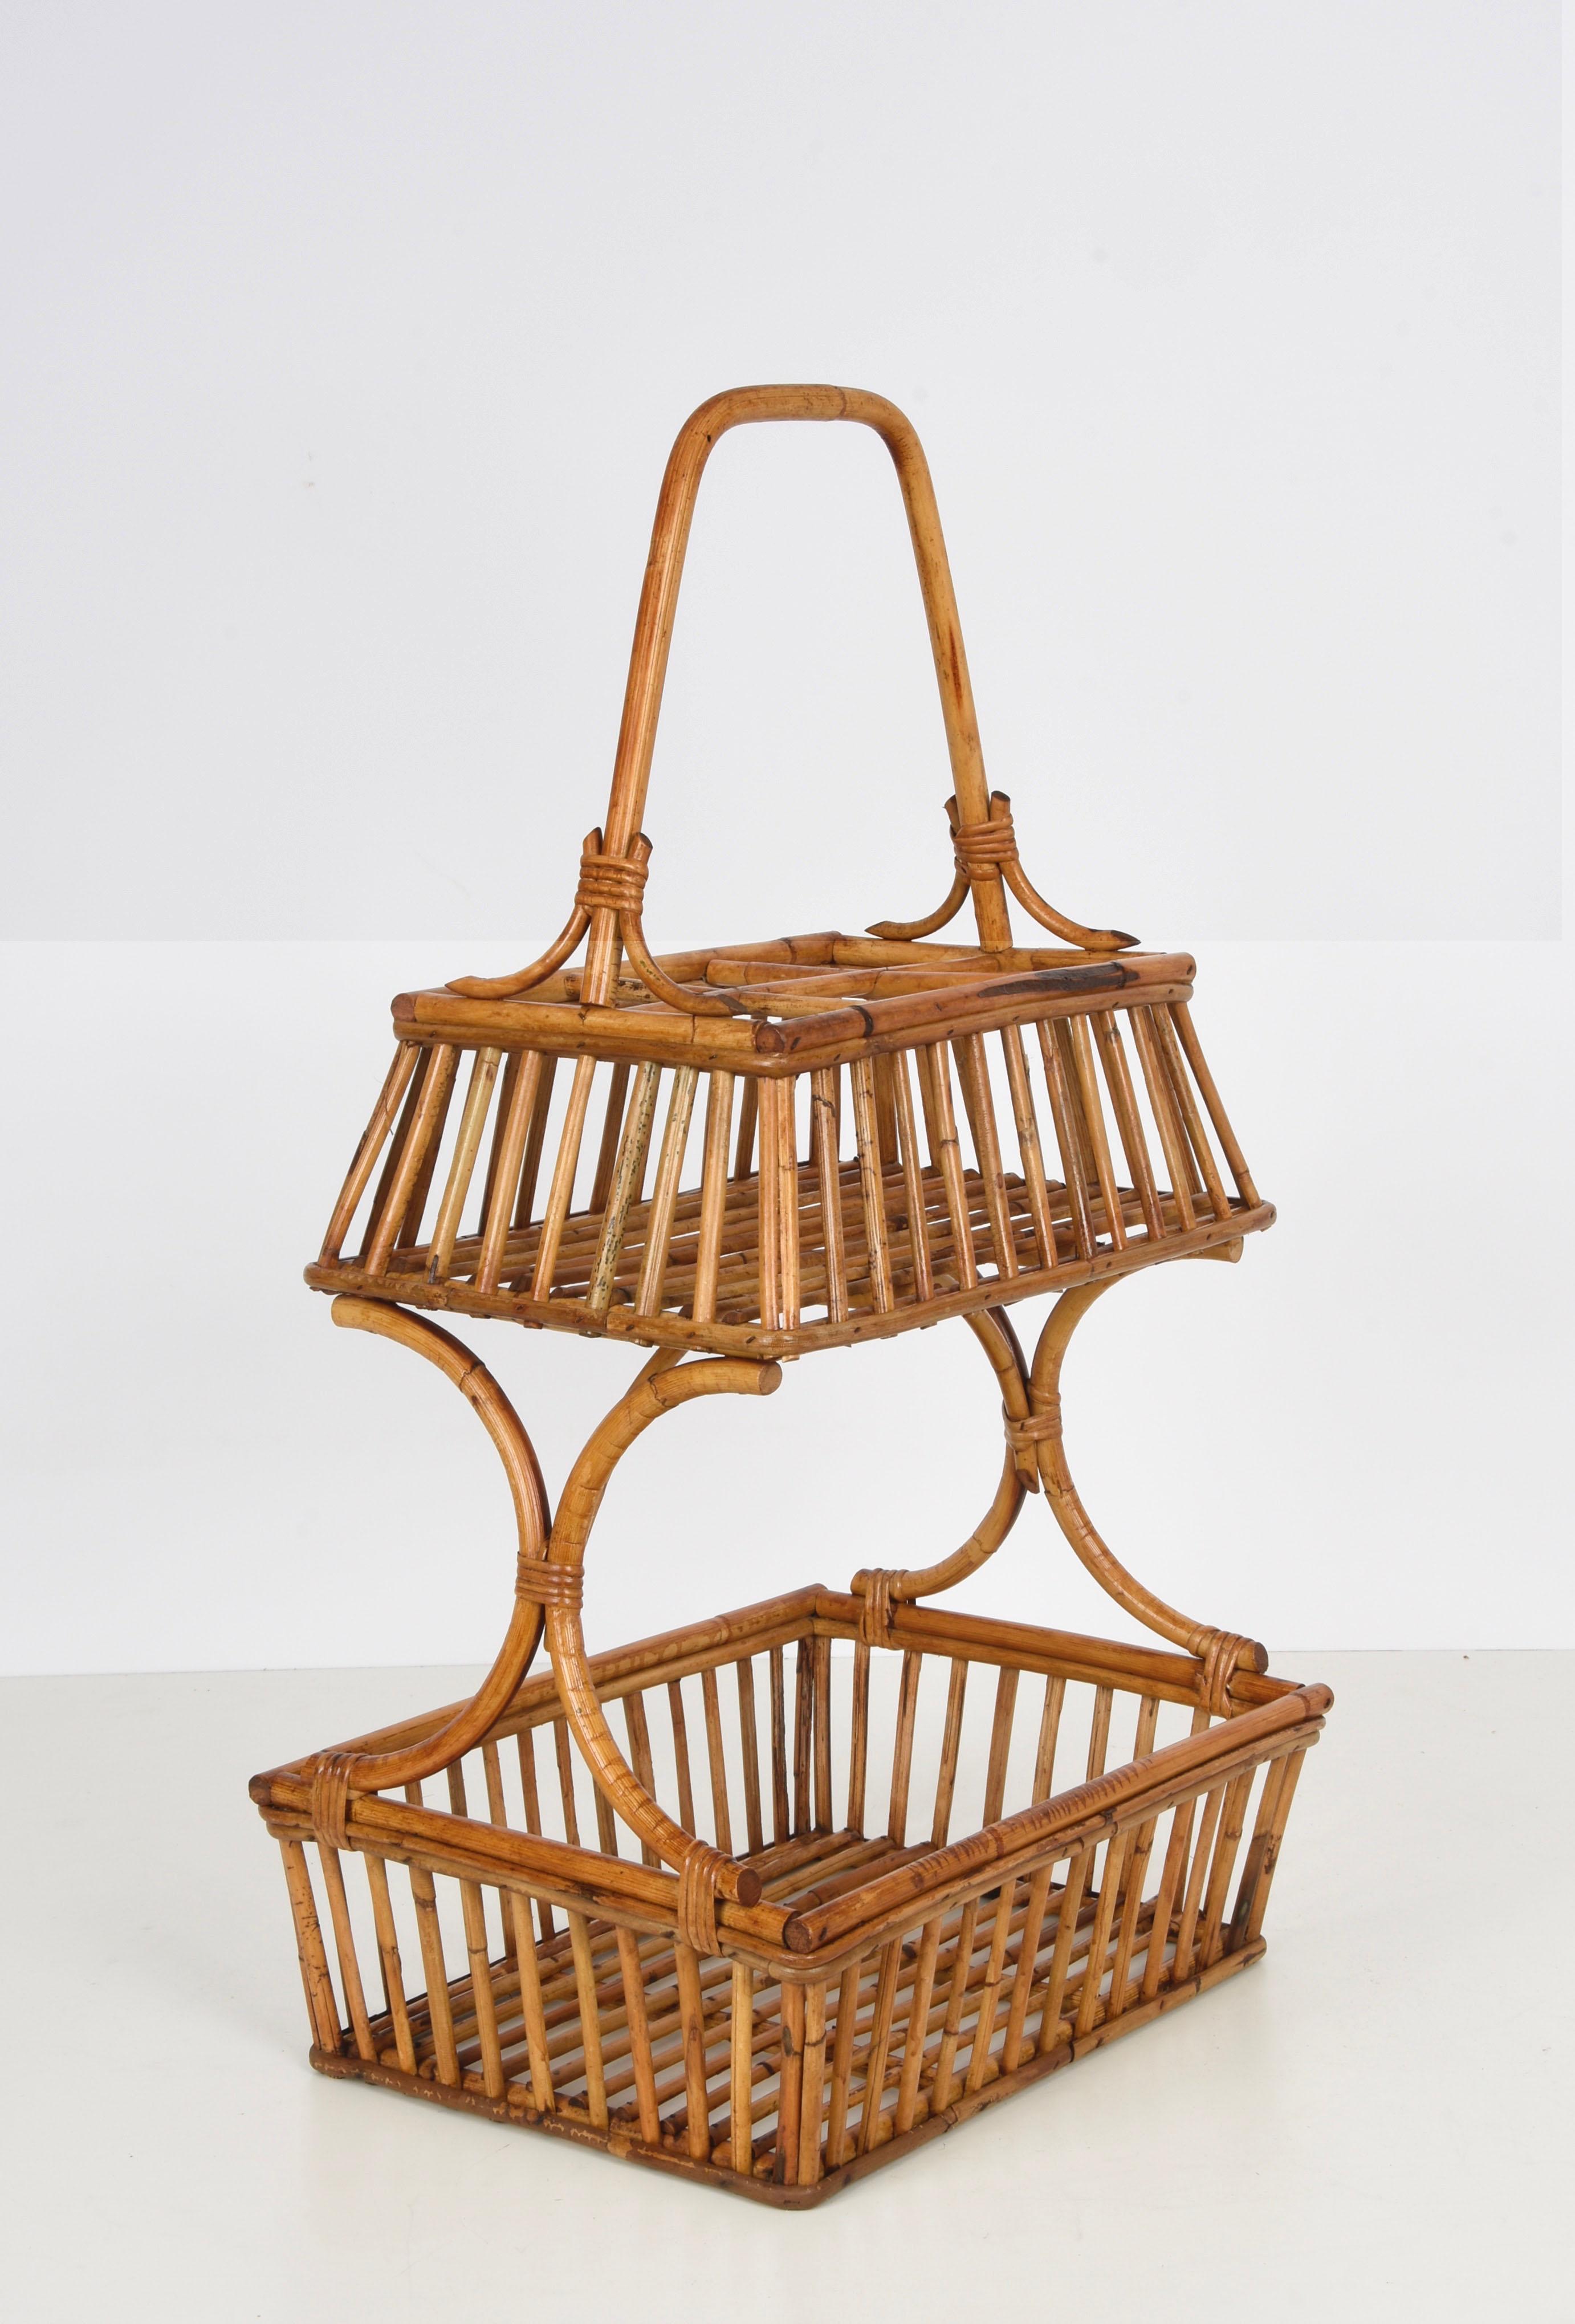 Mid-20th Century French Riviera Round Service Table with Bamboo and Rattan Bottle Holder, 1960s